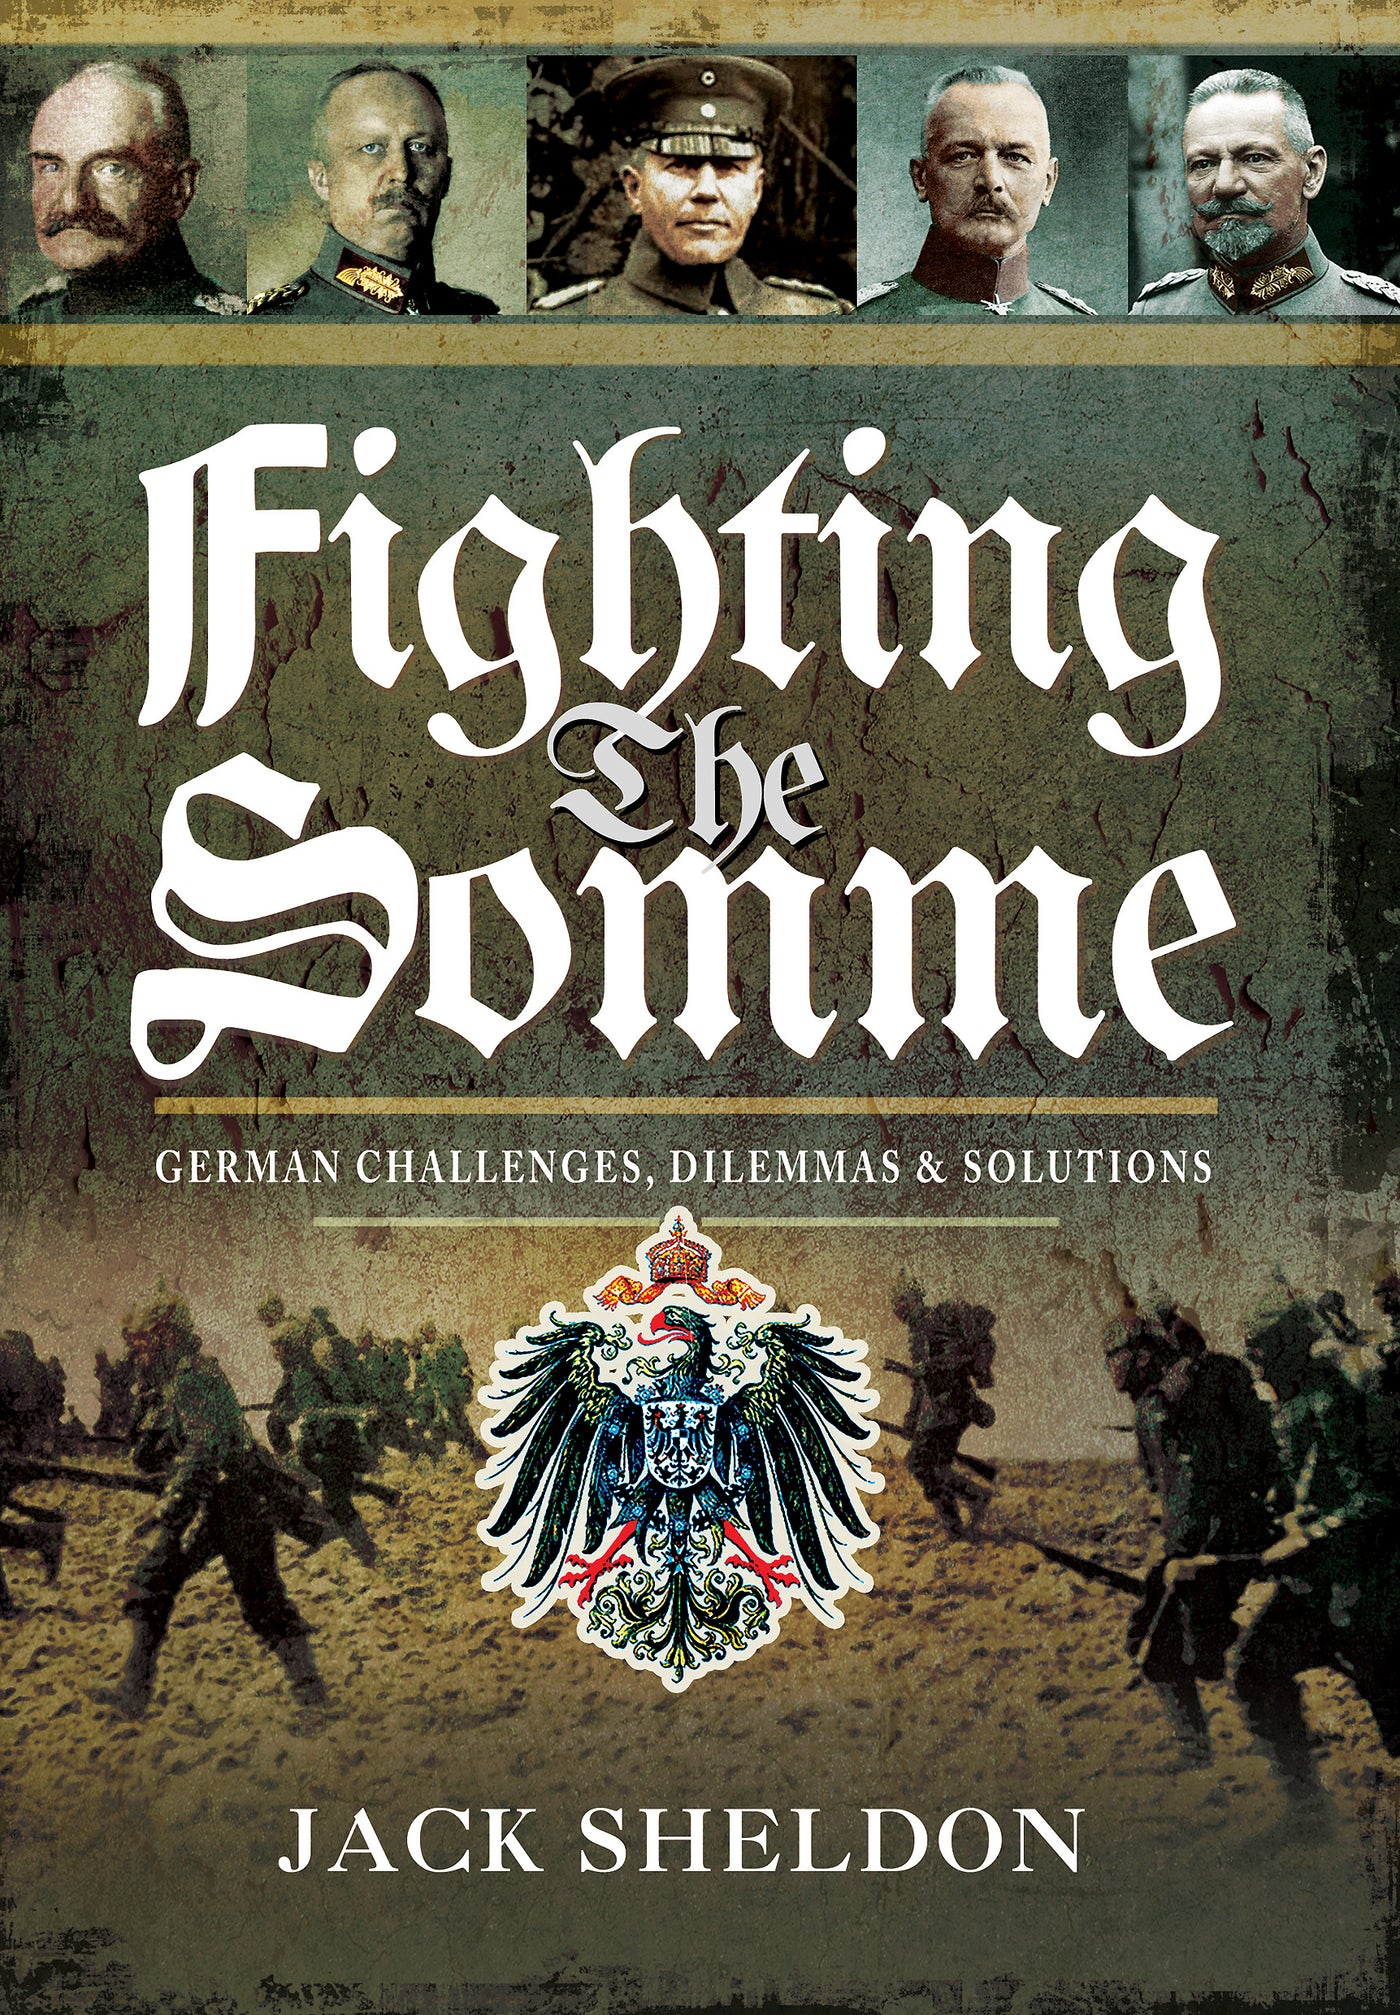 Fighting the Somme